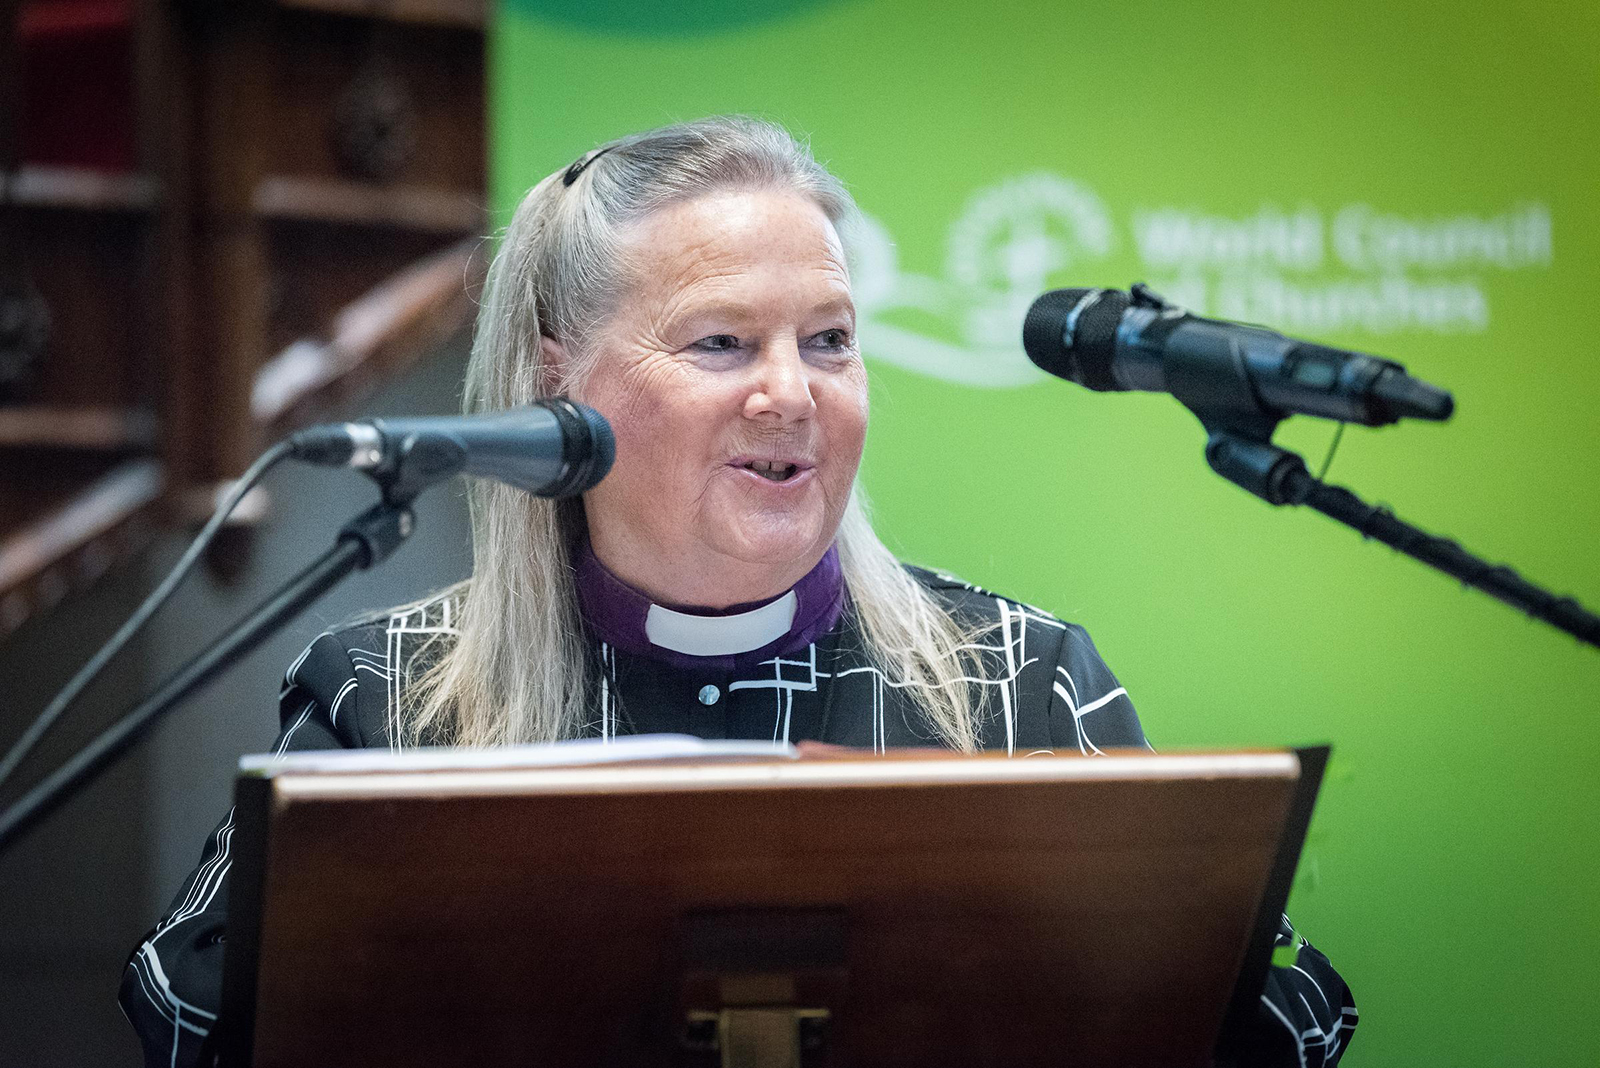 Bishop Mary Ann Swenson, one of the vice-moderators of the World Council of Churches Central Committee. Photo by Albin Hillert/WCC